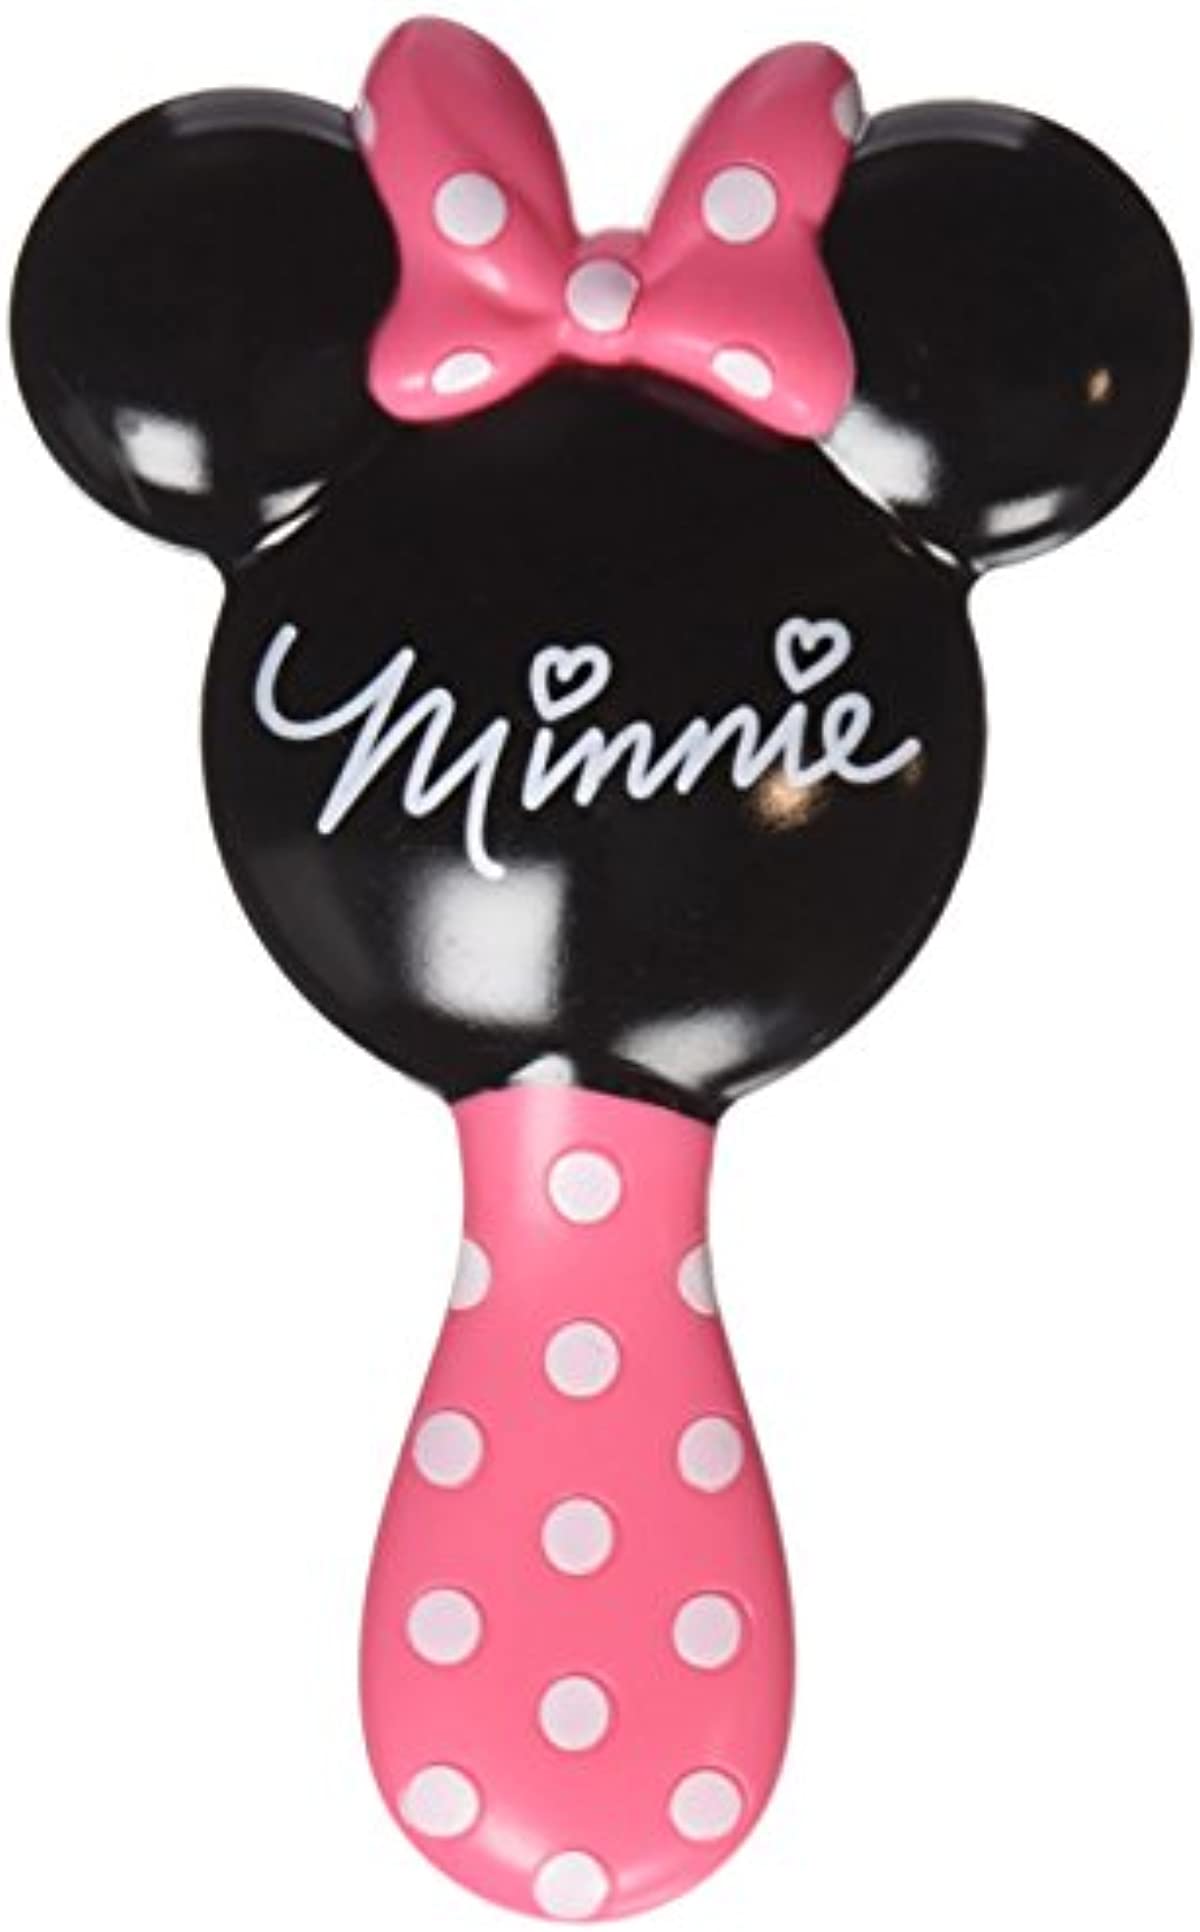 Disney Baby Minnie Hair Brush and Wide Tooth Comb Set